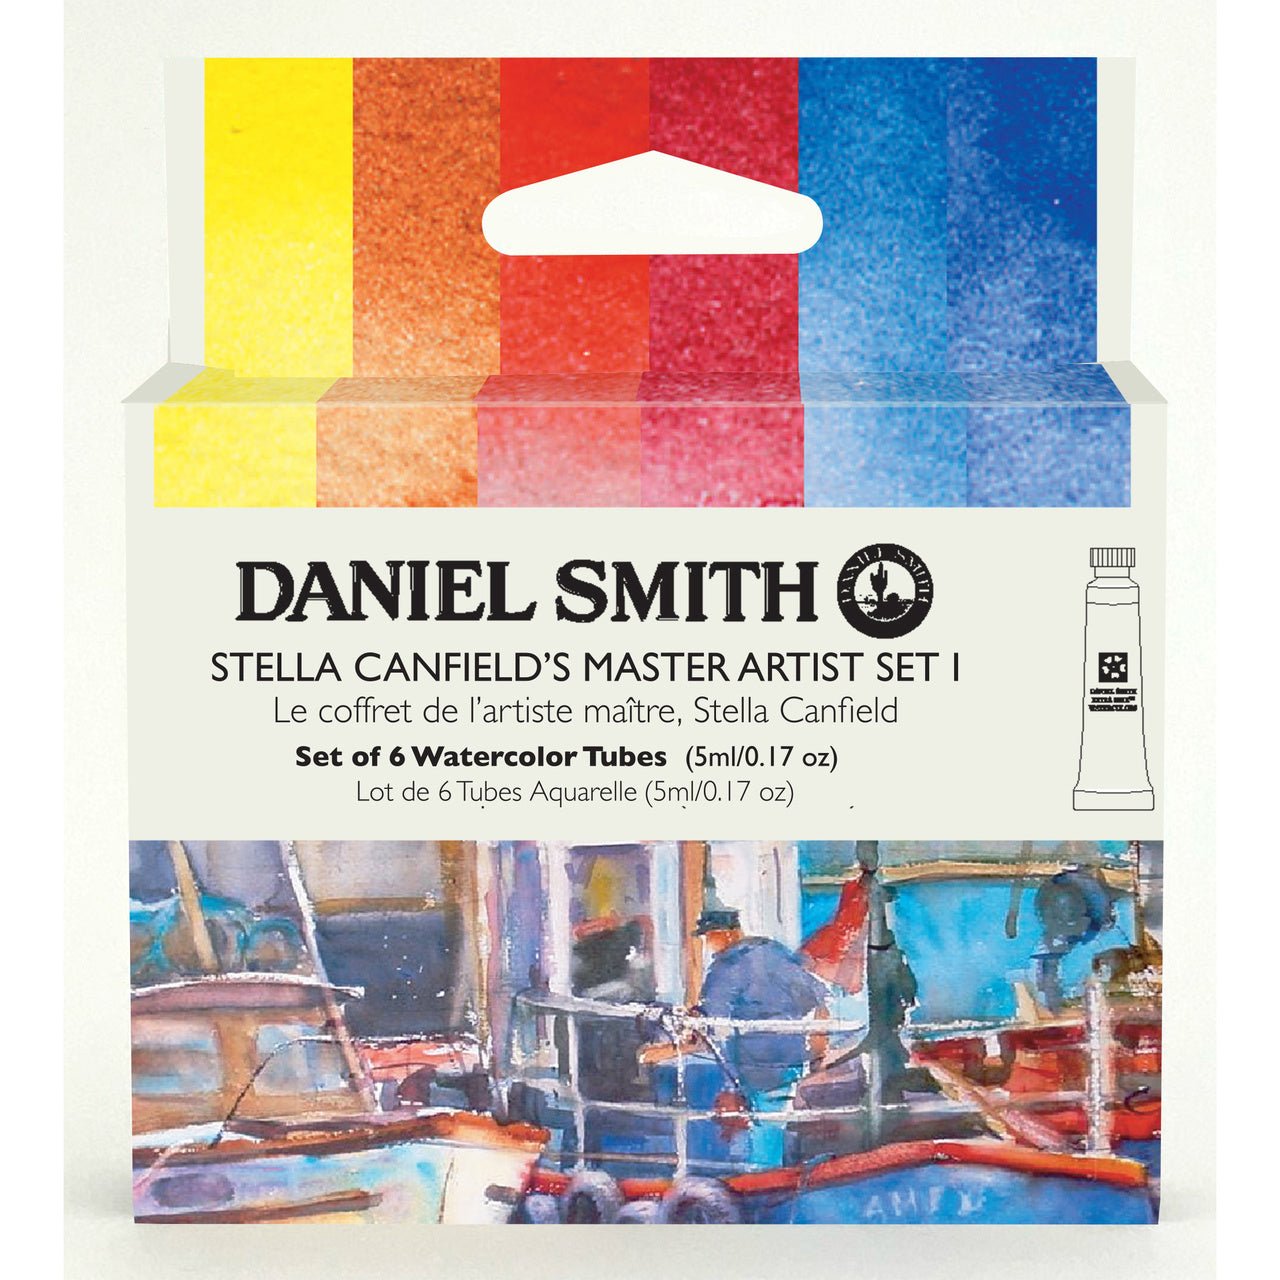 Clearance - Daniel Smith Extra Fine Watercolor Set - 6 Color Stella Canfield's Master Artist Set #1 (6 X 5ml tubes)